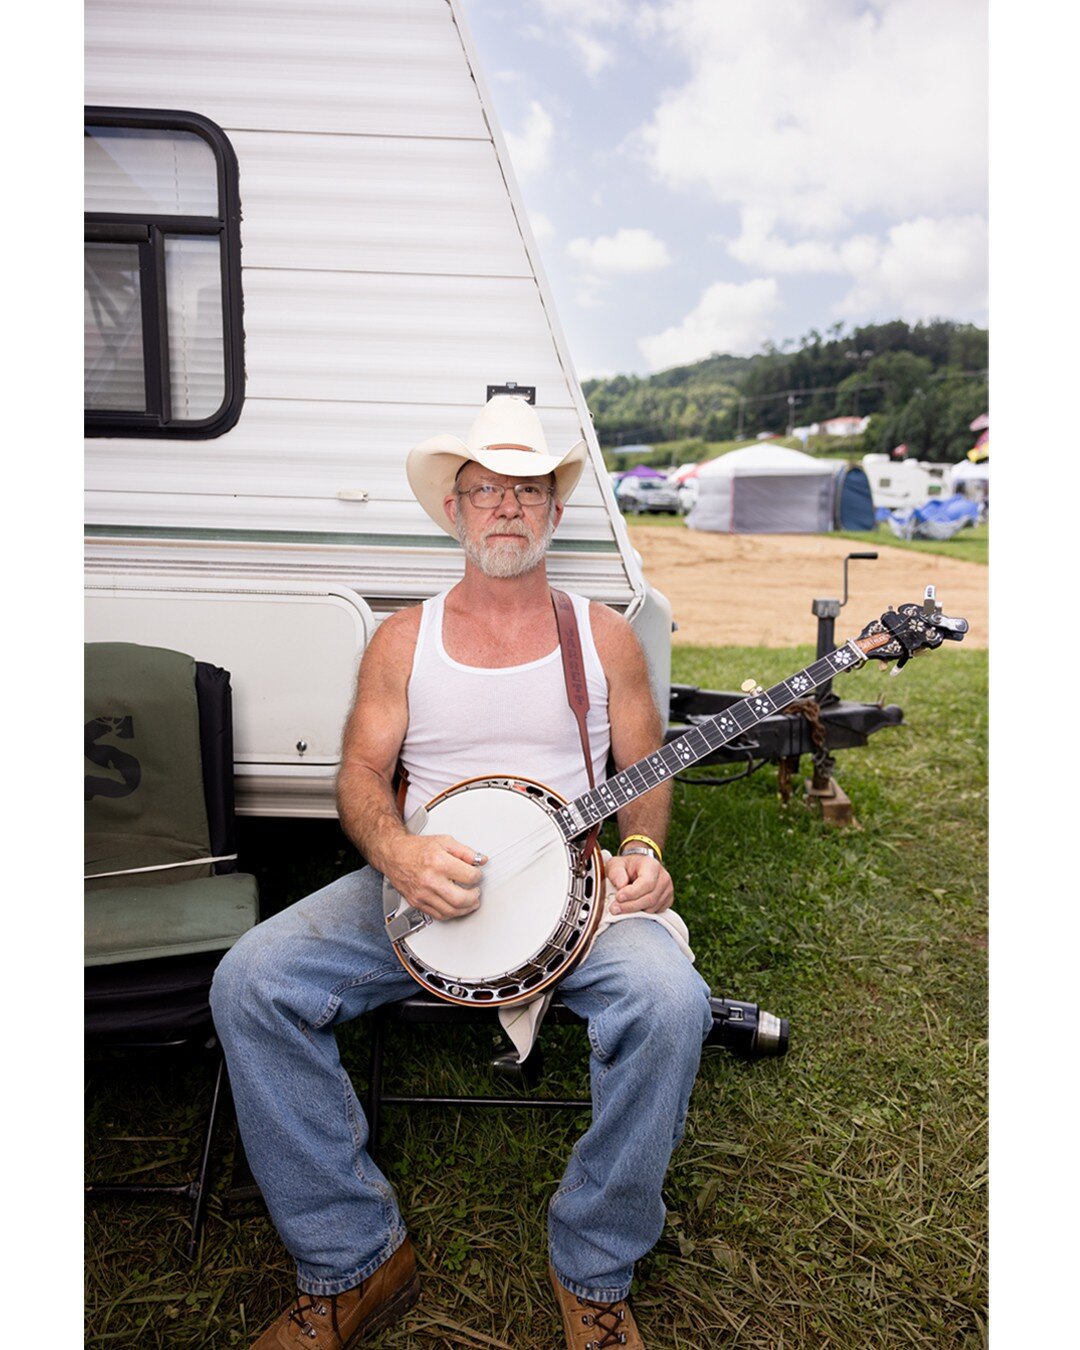 The Old Fiddler&rsquo;s Convention in Galax, Virginia celebrates its 87th year this week. Musicians and fans from across the globe converge in this small Blue Ridge Mountain town to celebrate Appalachia's old time mountain music.

The Appalachian mus